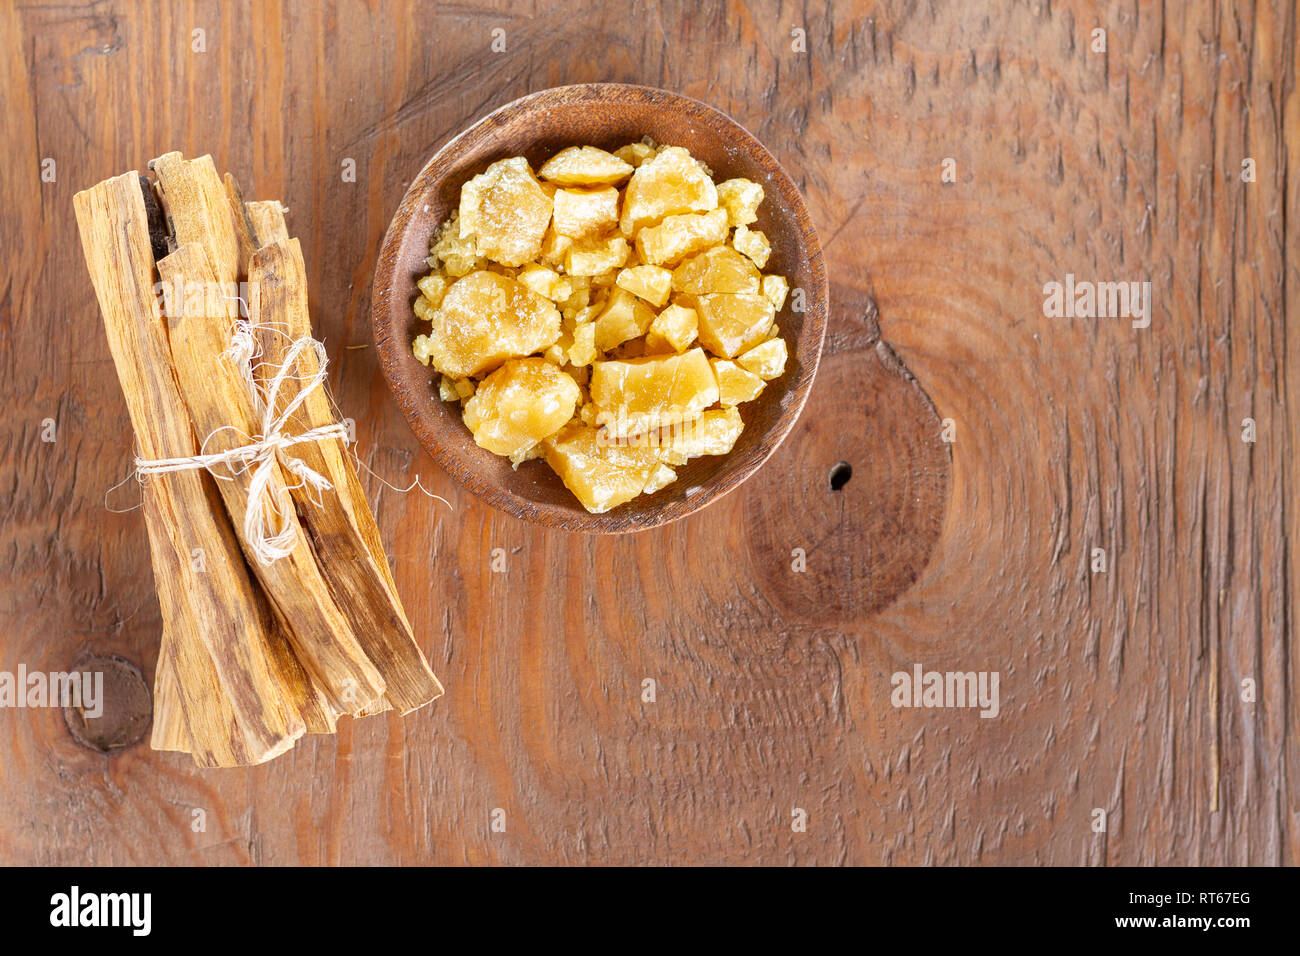 Bursera graveolens, essence and resin. in Spanish ('palo santo') is a wild tree in Latin America. used as incense. Stock Photo